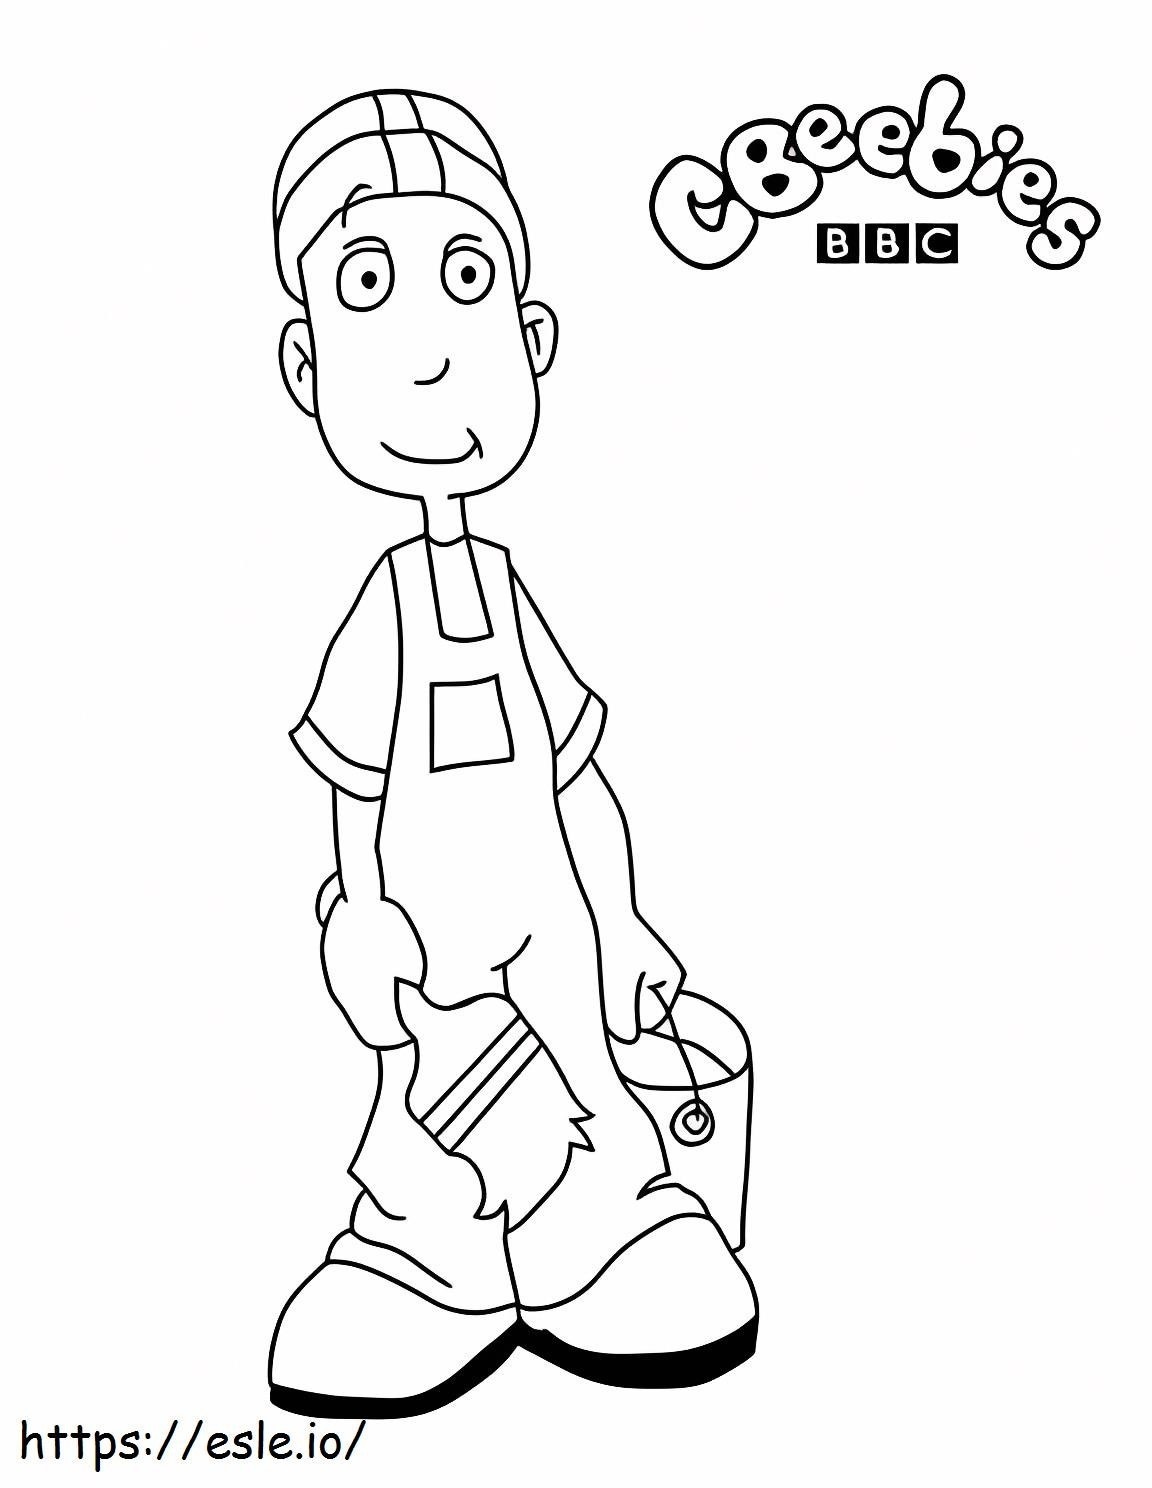 Th Image coloring page